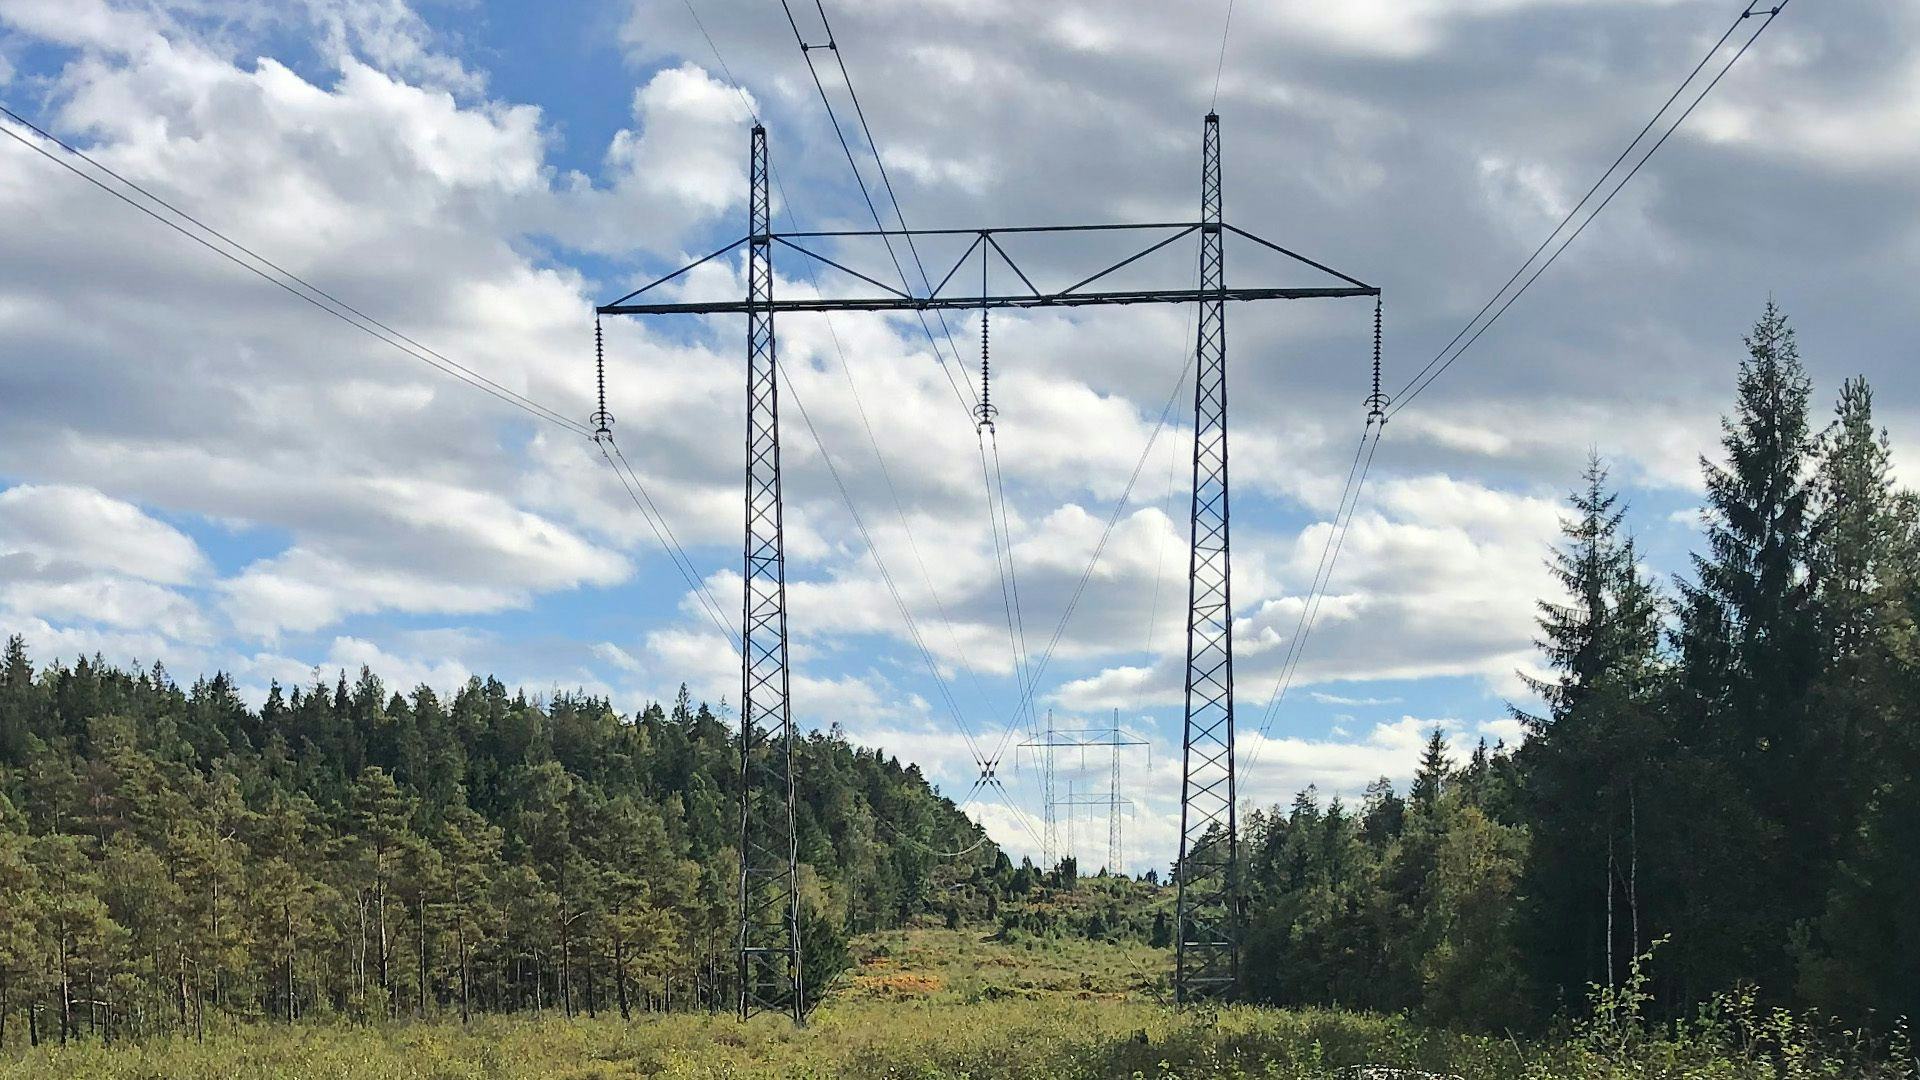 Towering electricity pylon set against a background of a forest and a partly cloudy sky